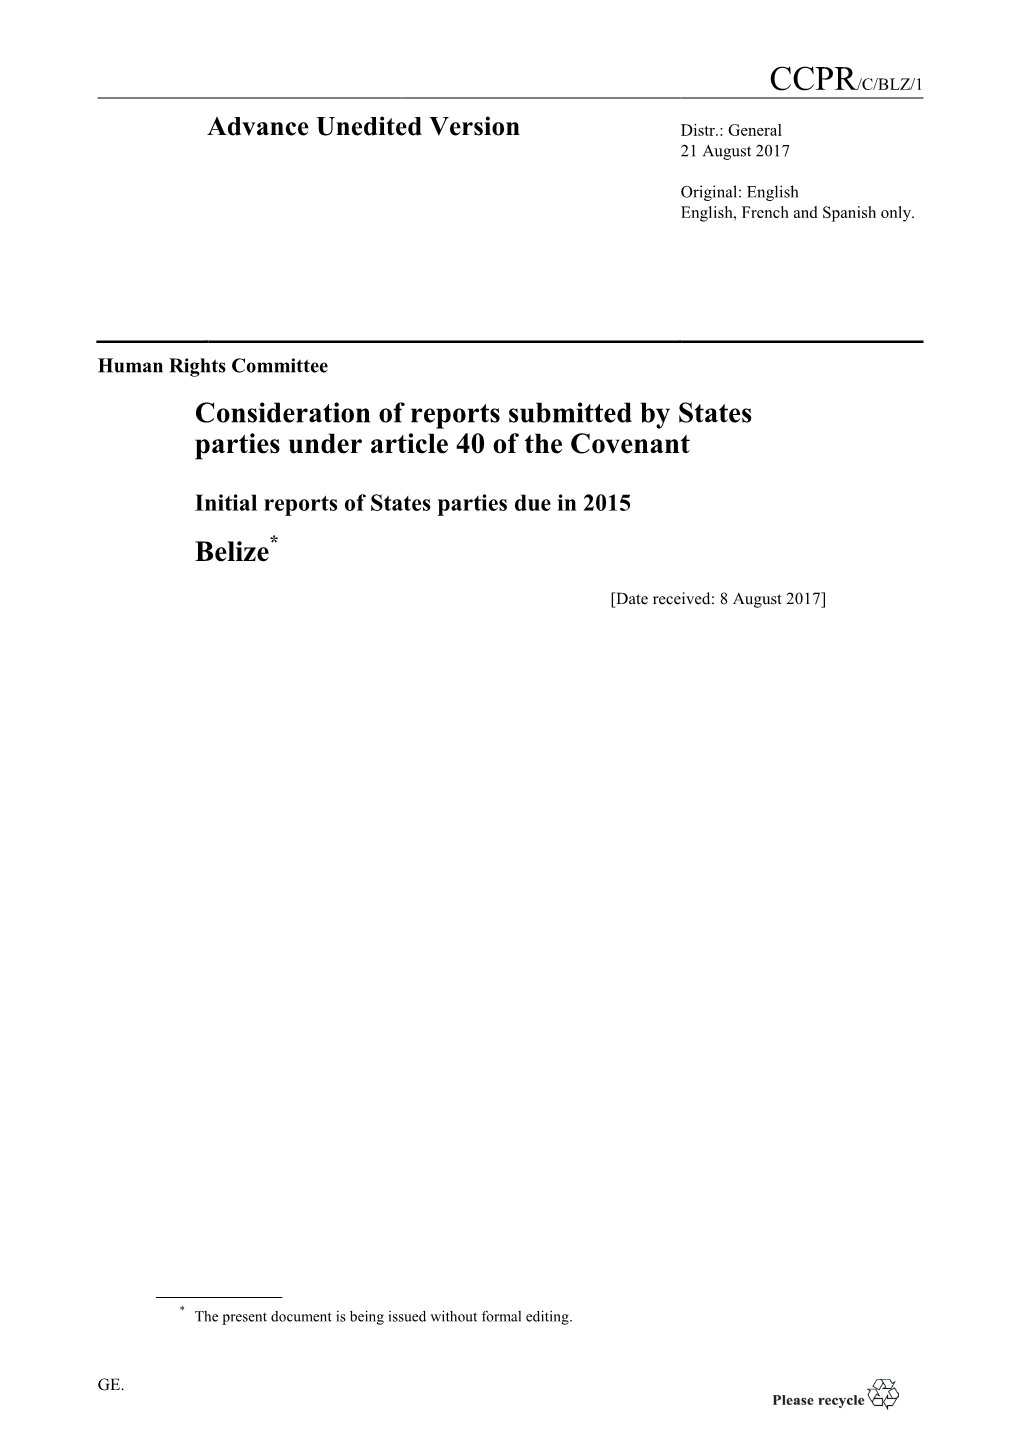 Consideration of Reports Submitted by States Parties Under Article 40 of the Covenant Belize